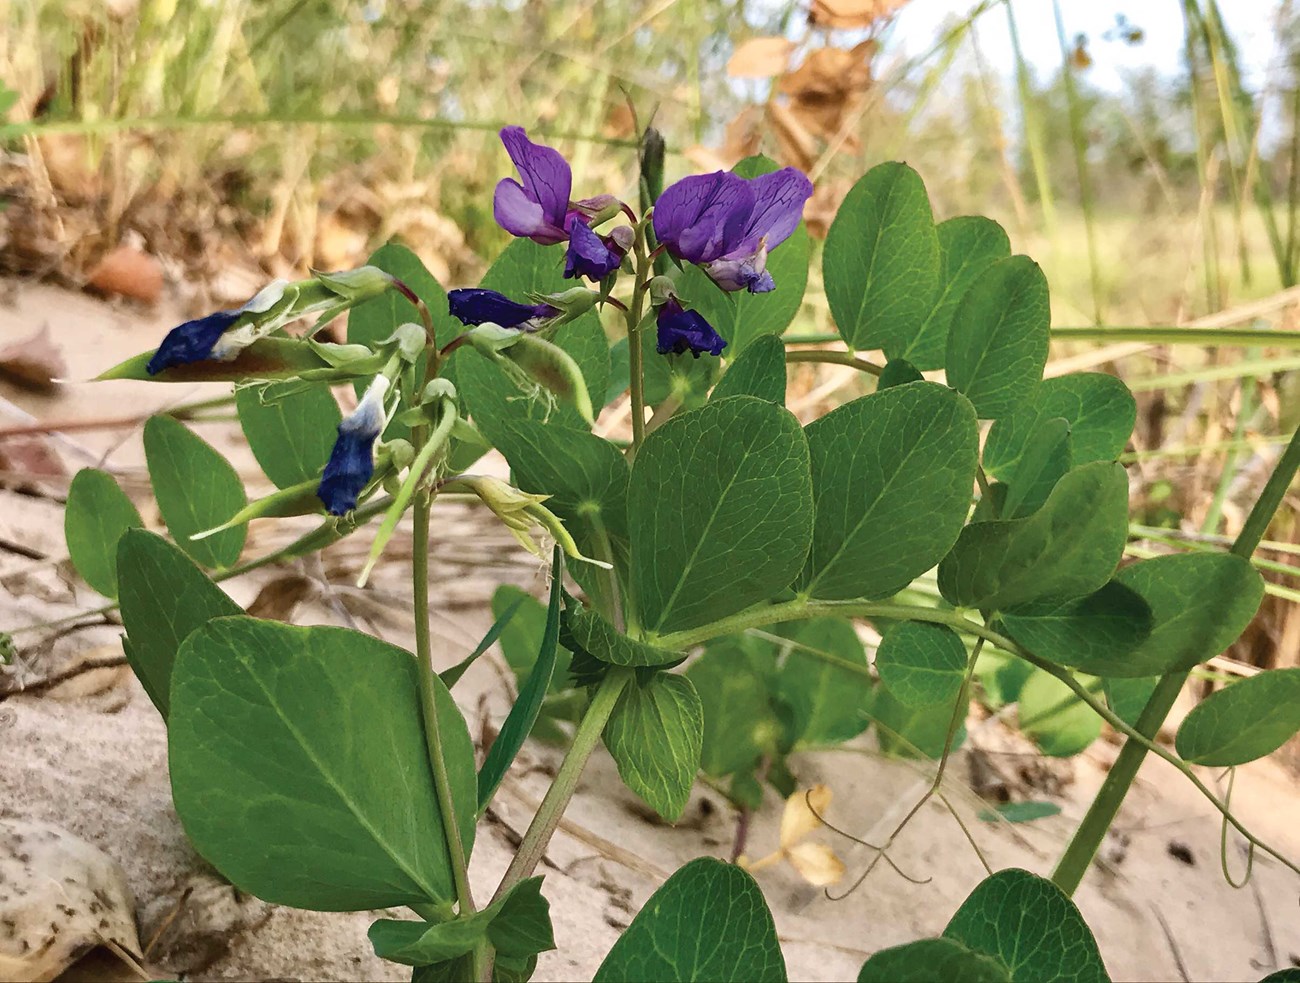 The beach pea flower is compact and erect, its color a showy purple.